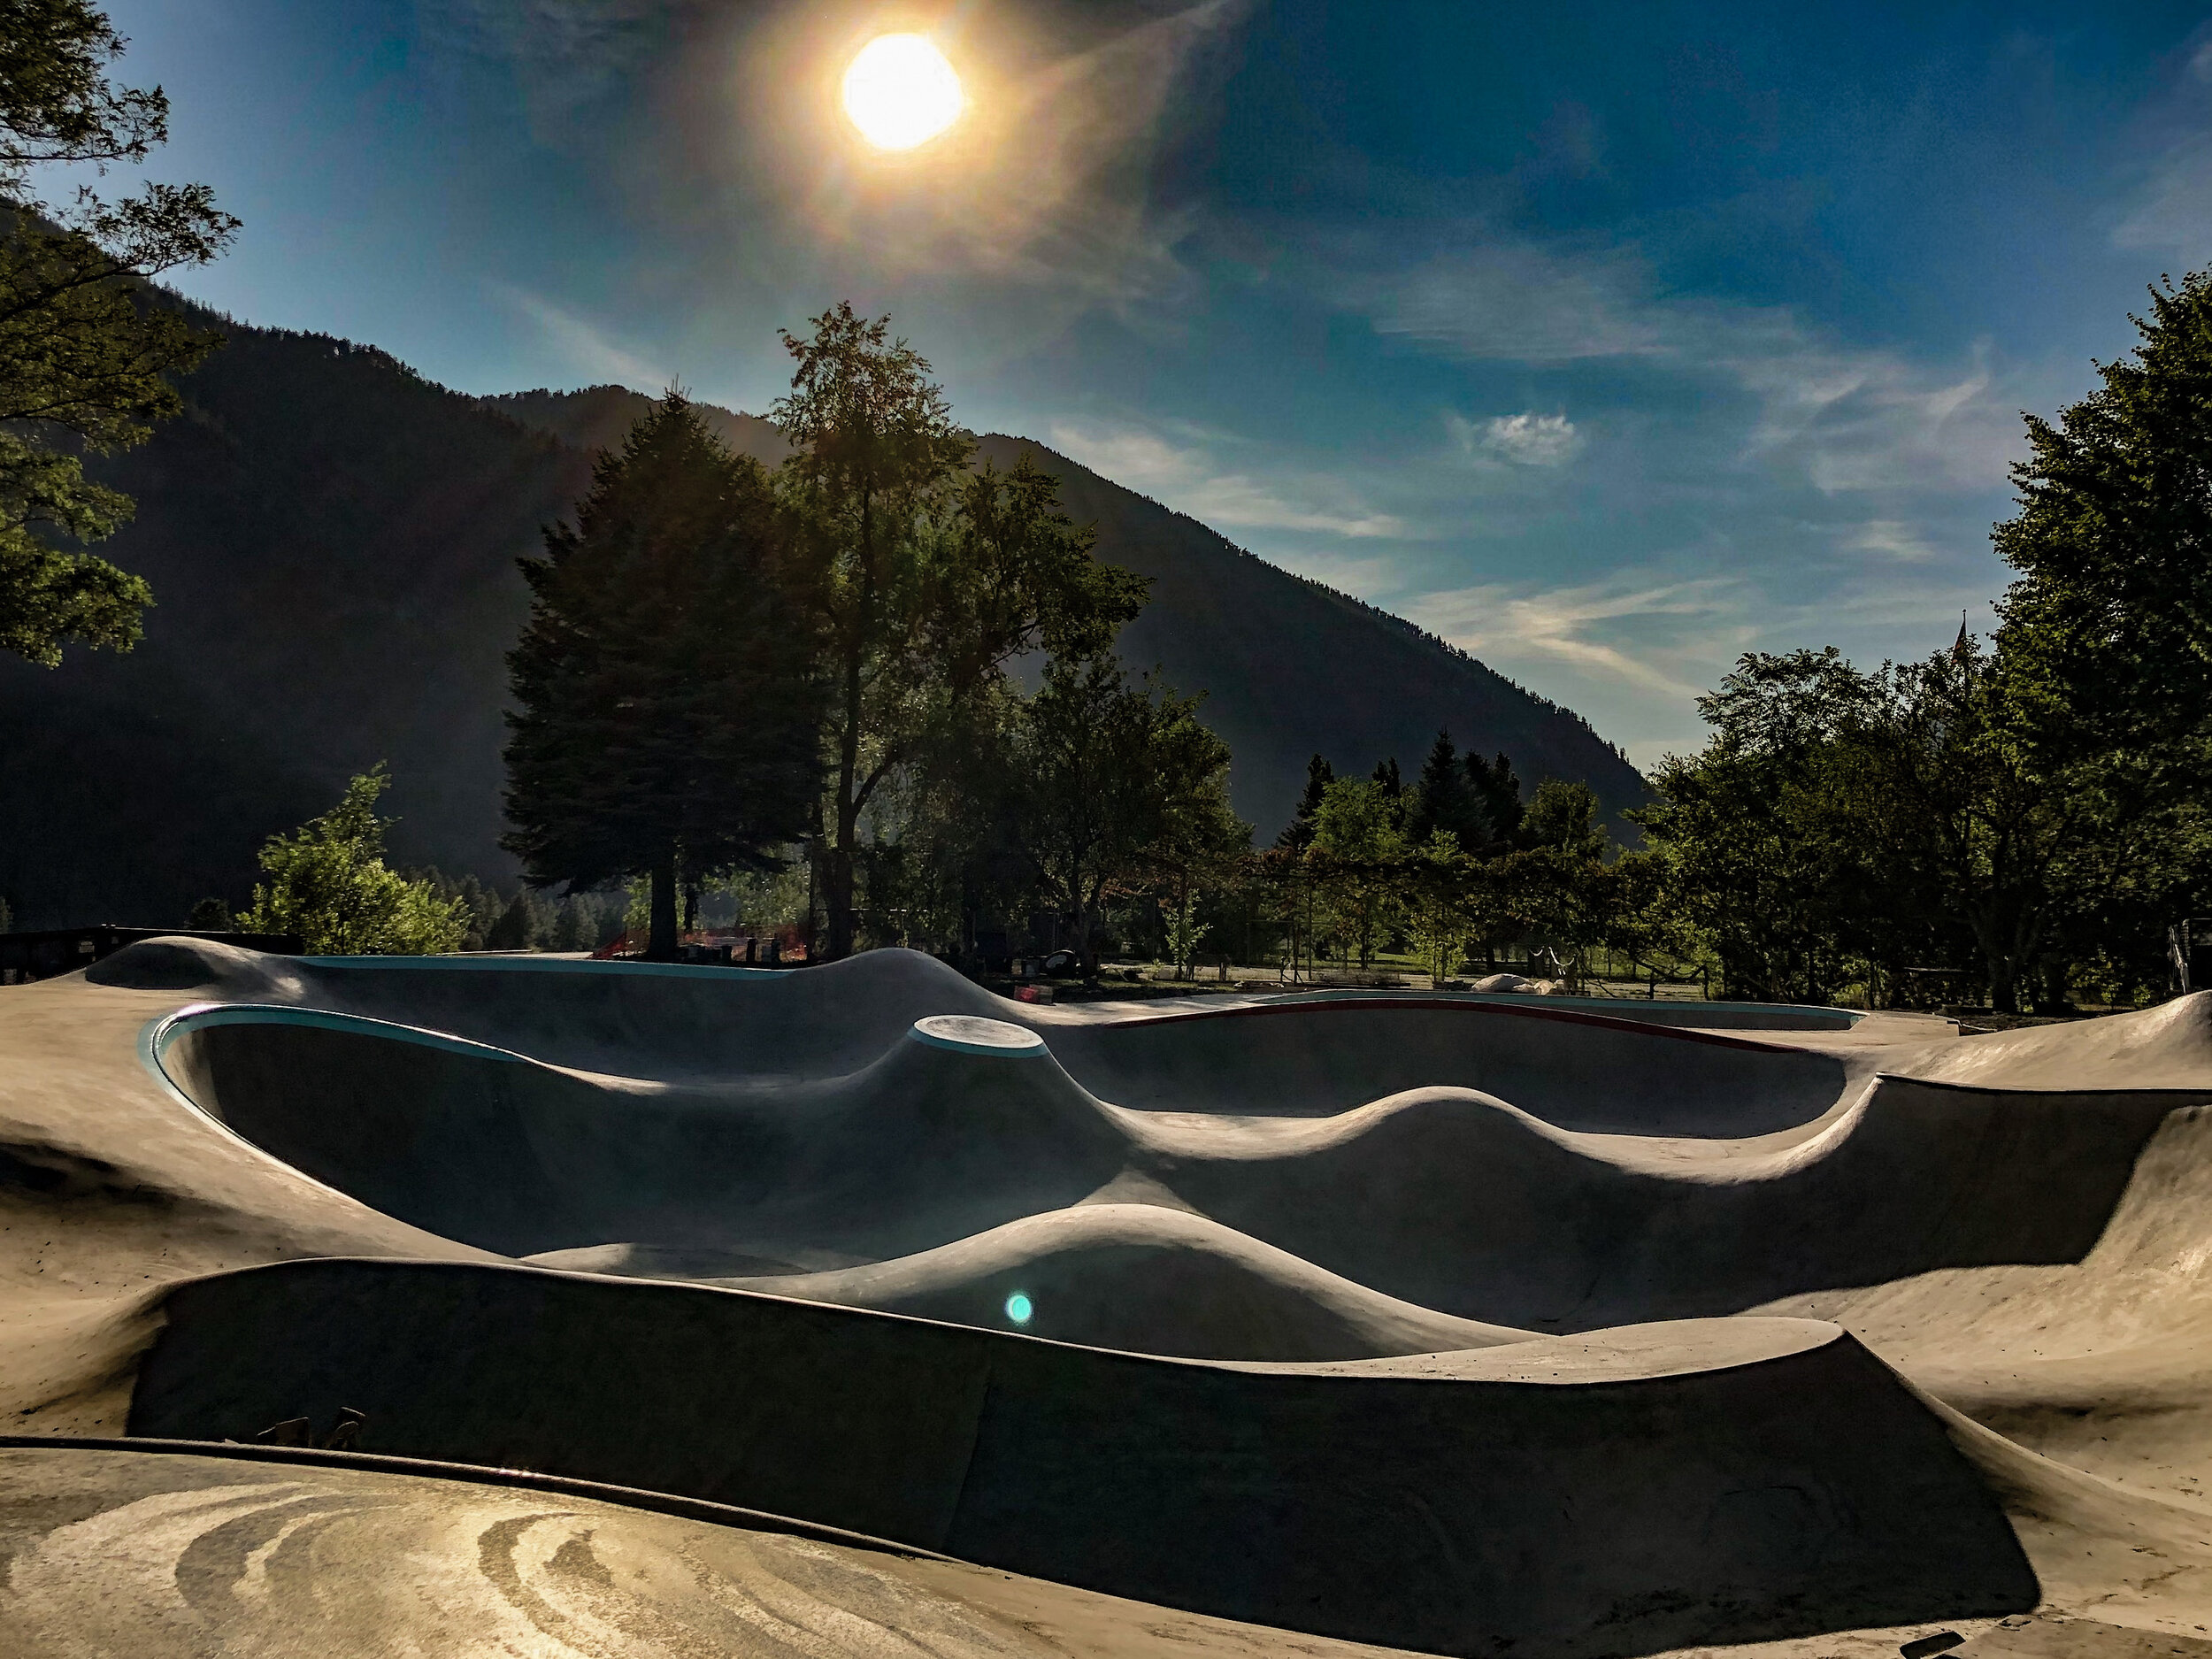 Skateboarding landscapes 🏞 in #bigskycountry 💯